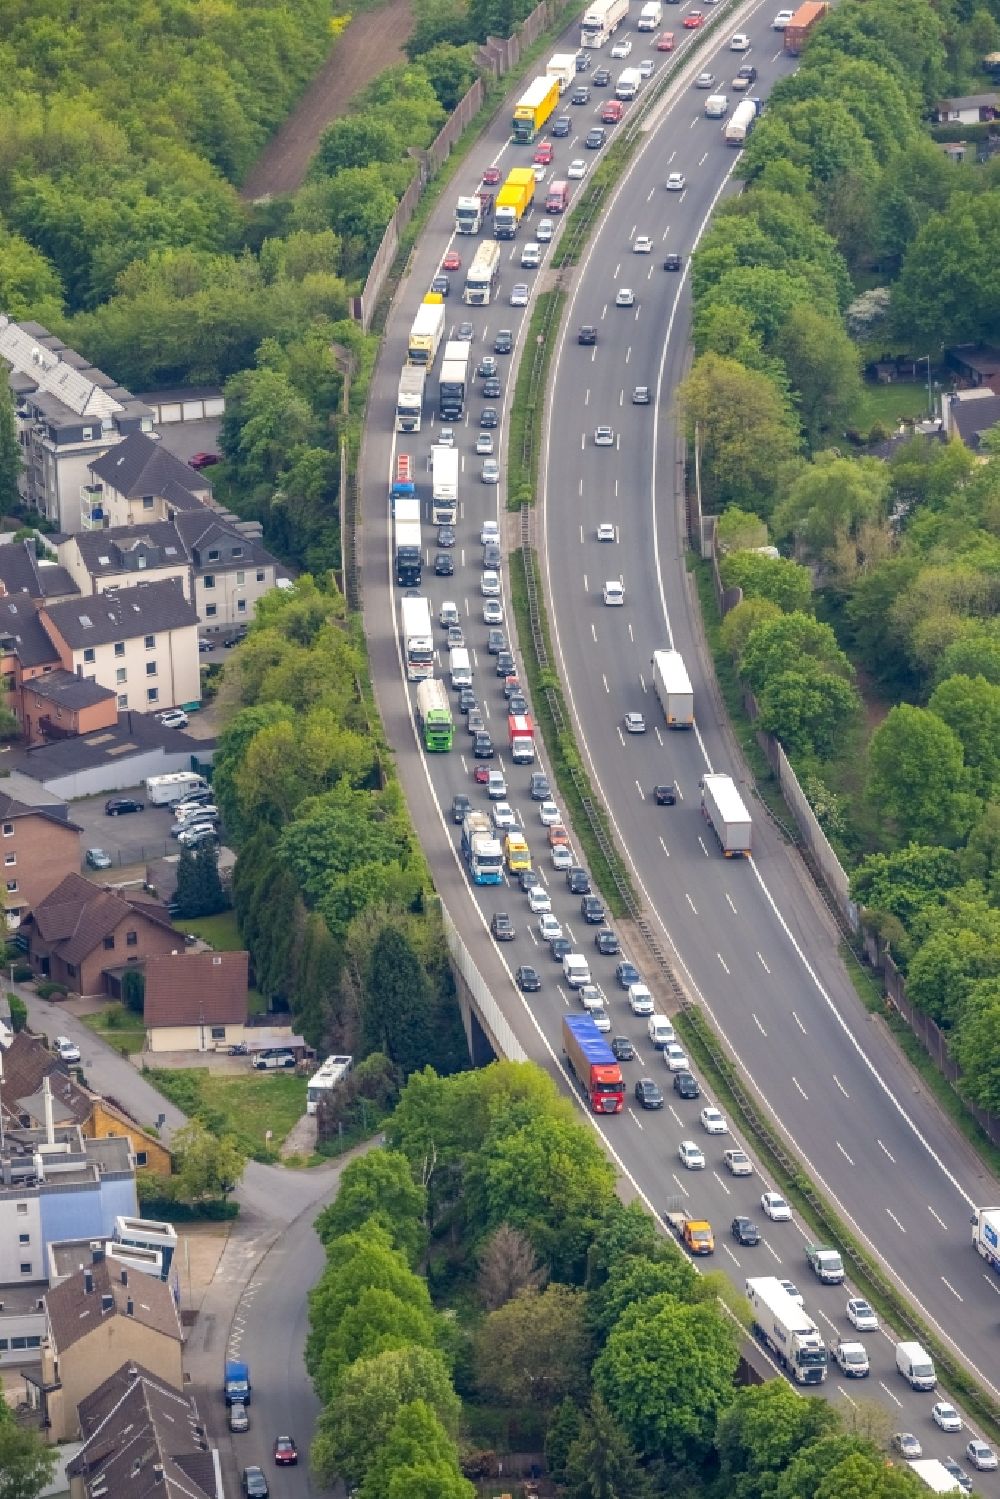 Duisburg from the bird's eye view: Motorway congestion along the route of the lanes A3 in the district Alstaden in Duisburg at Ruhrgebiet in the state North Rhine-Westphalia, Germany